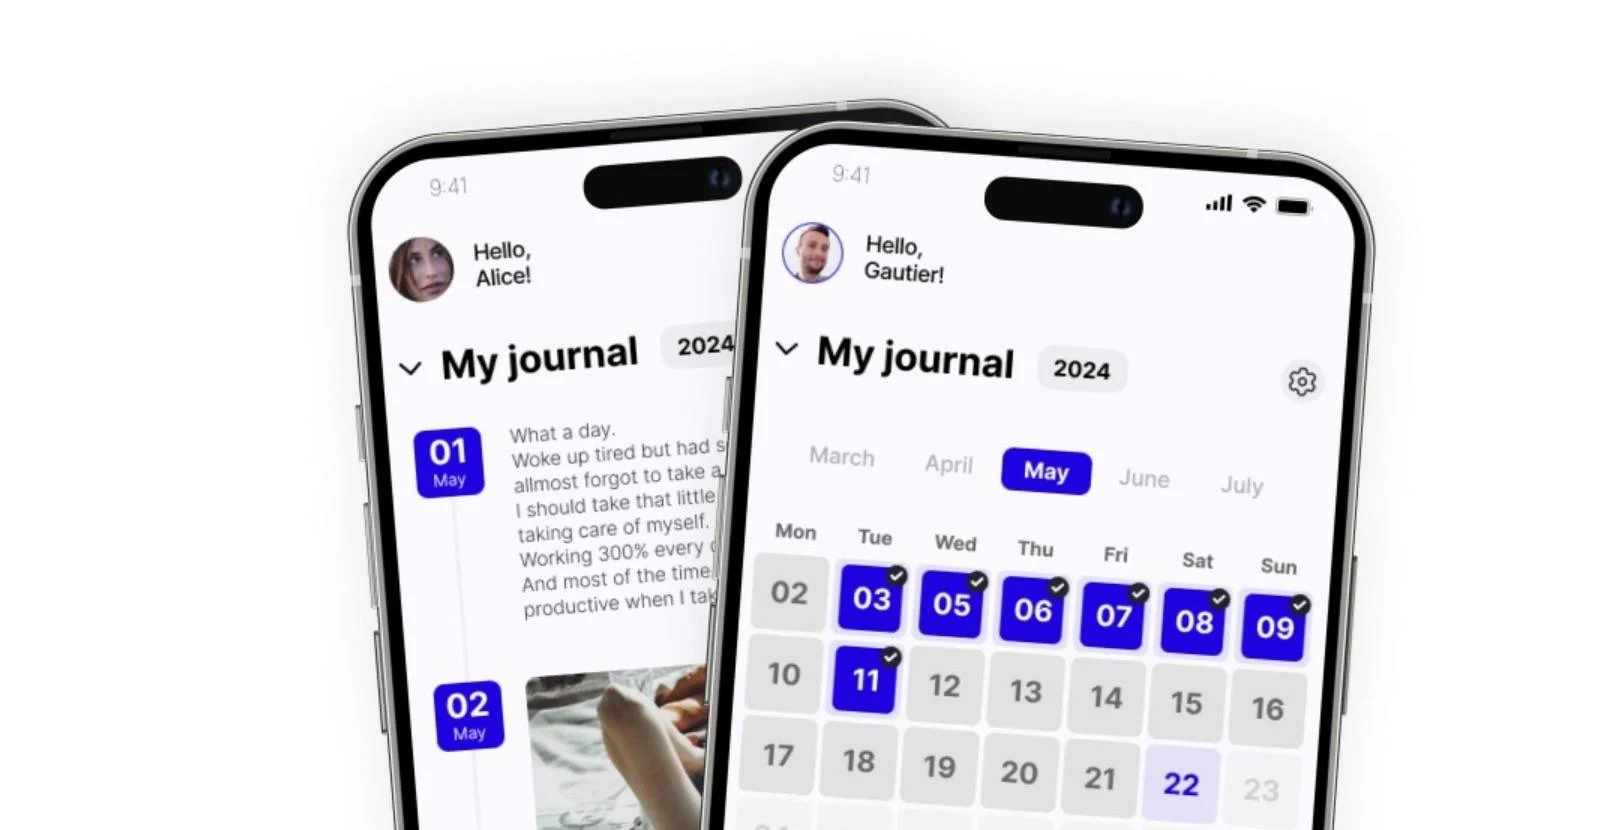 ULY Journal App - Home